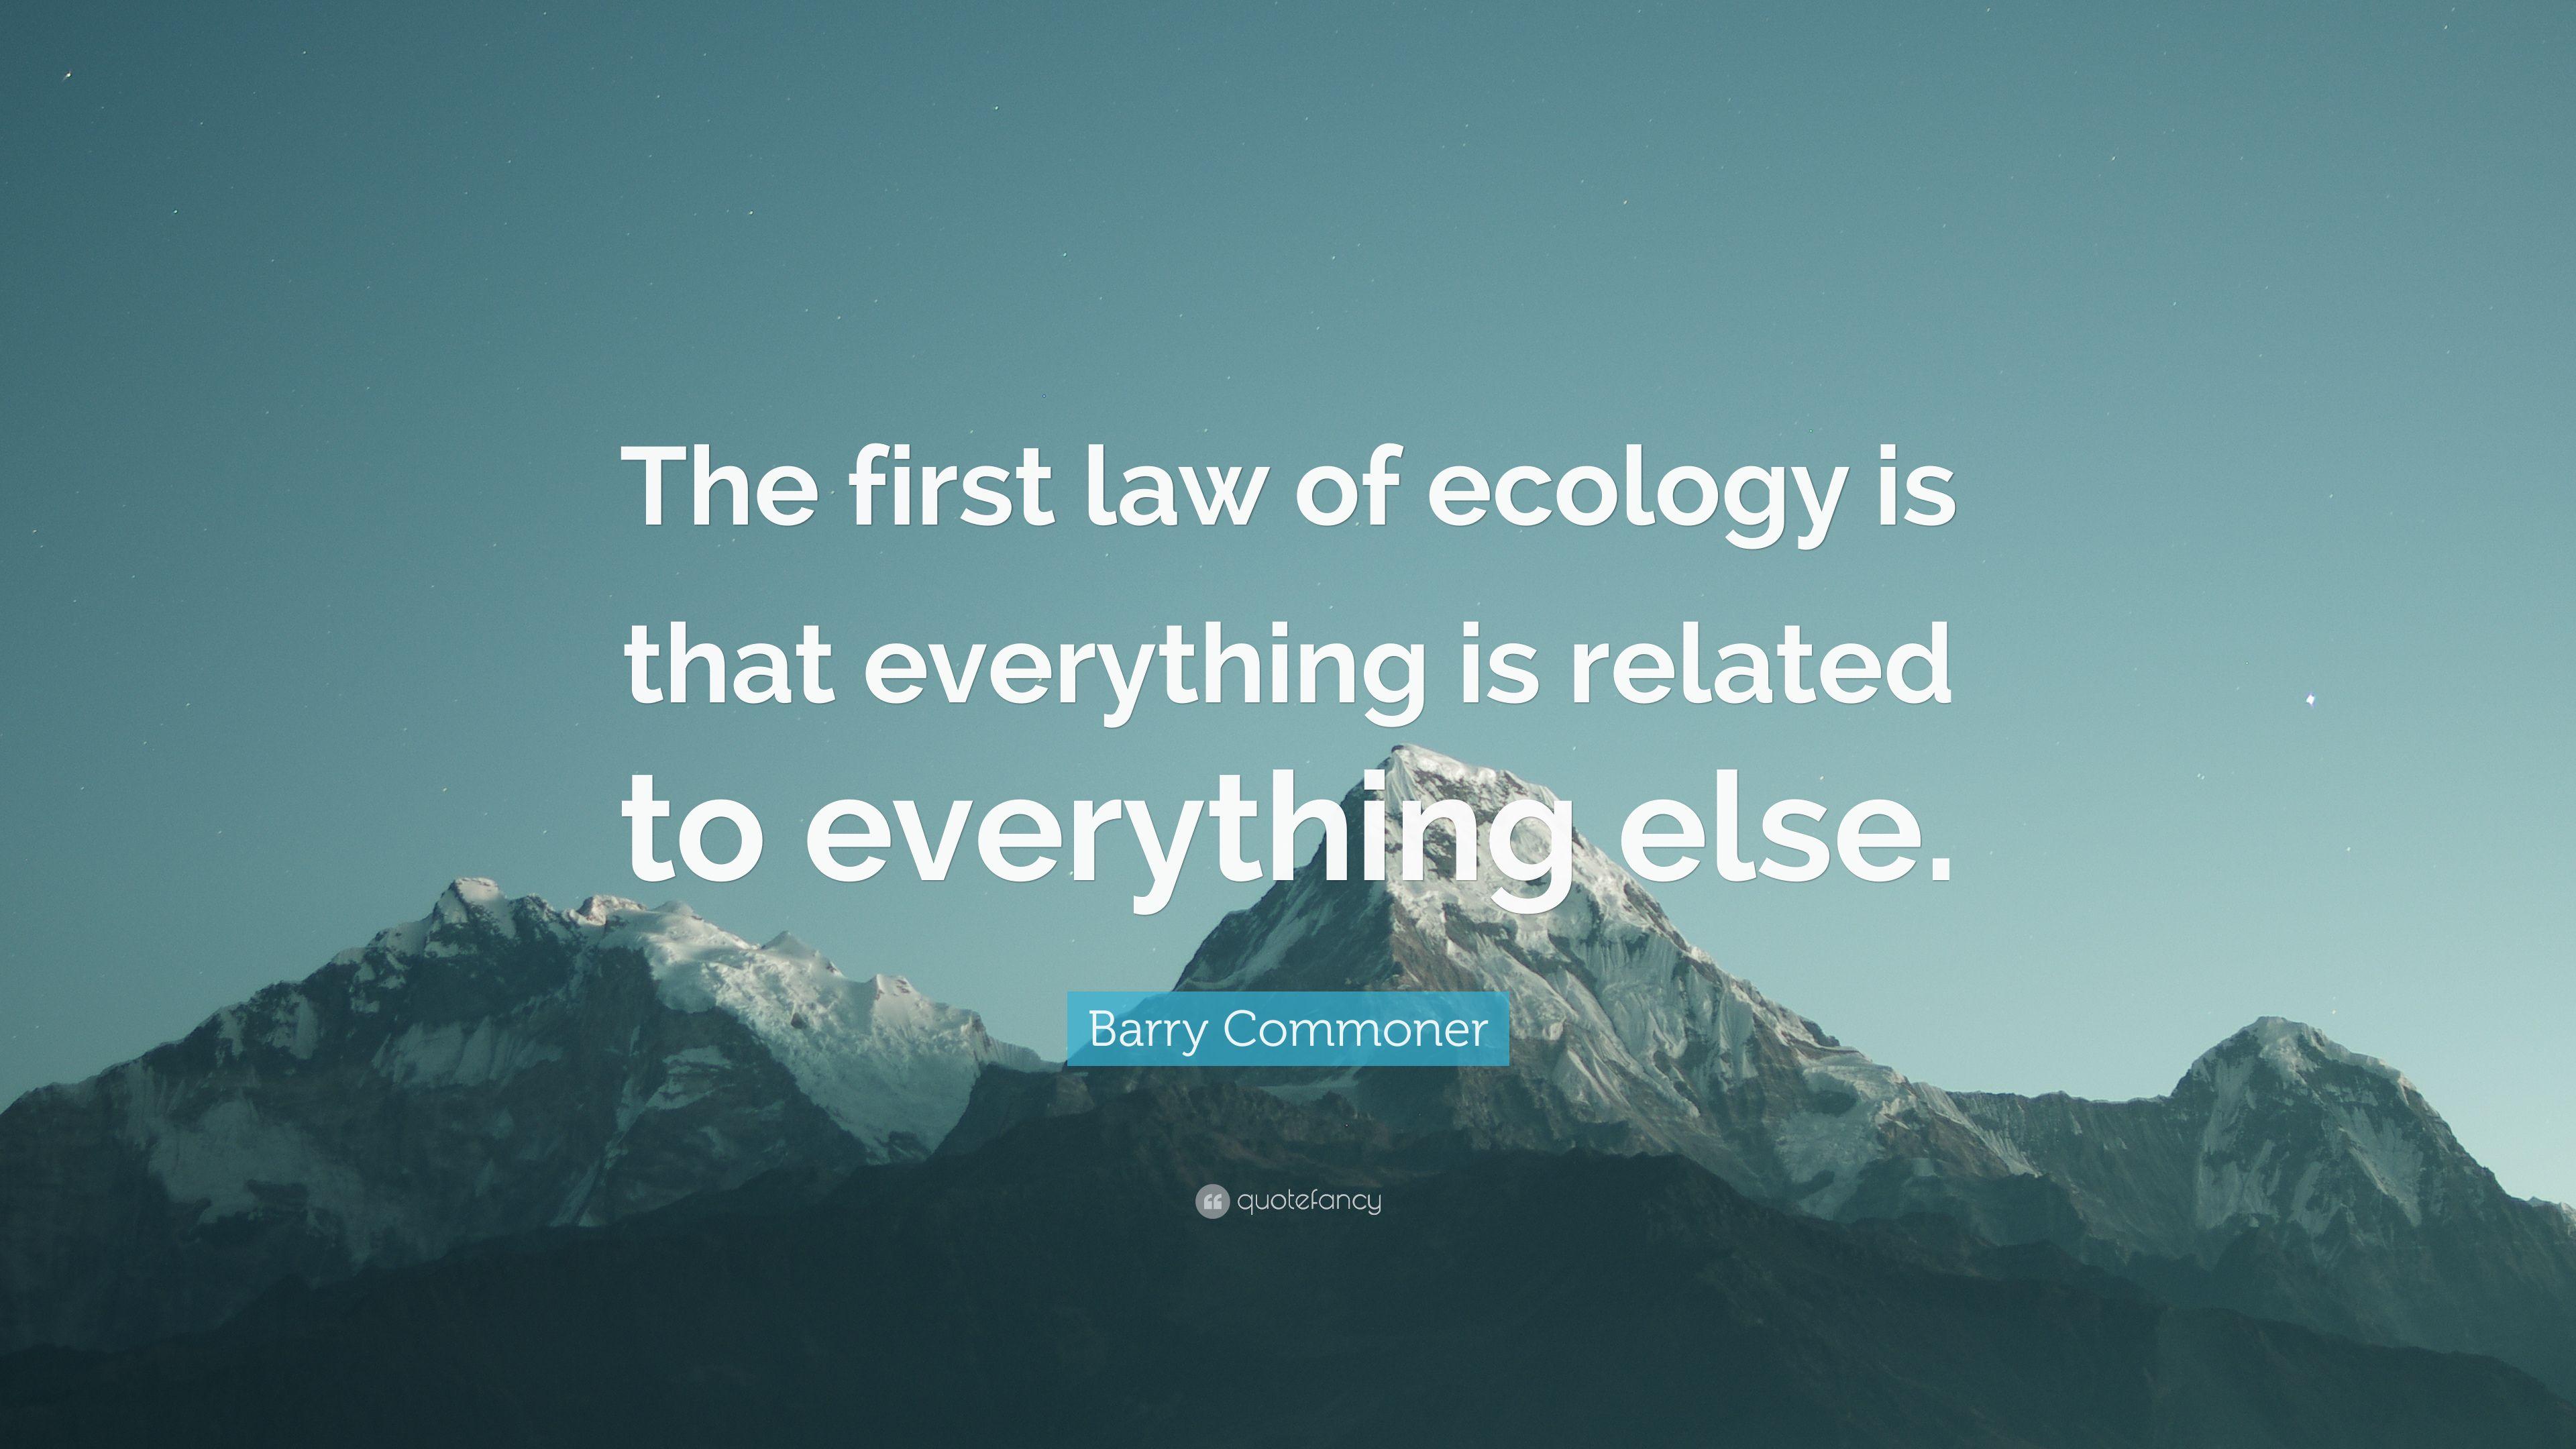 Barry Commoner Quote: “The first law of ecology is that everything